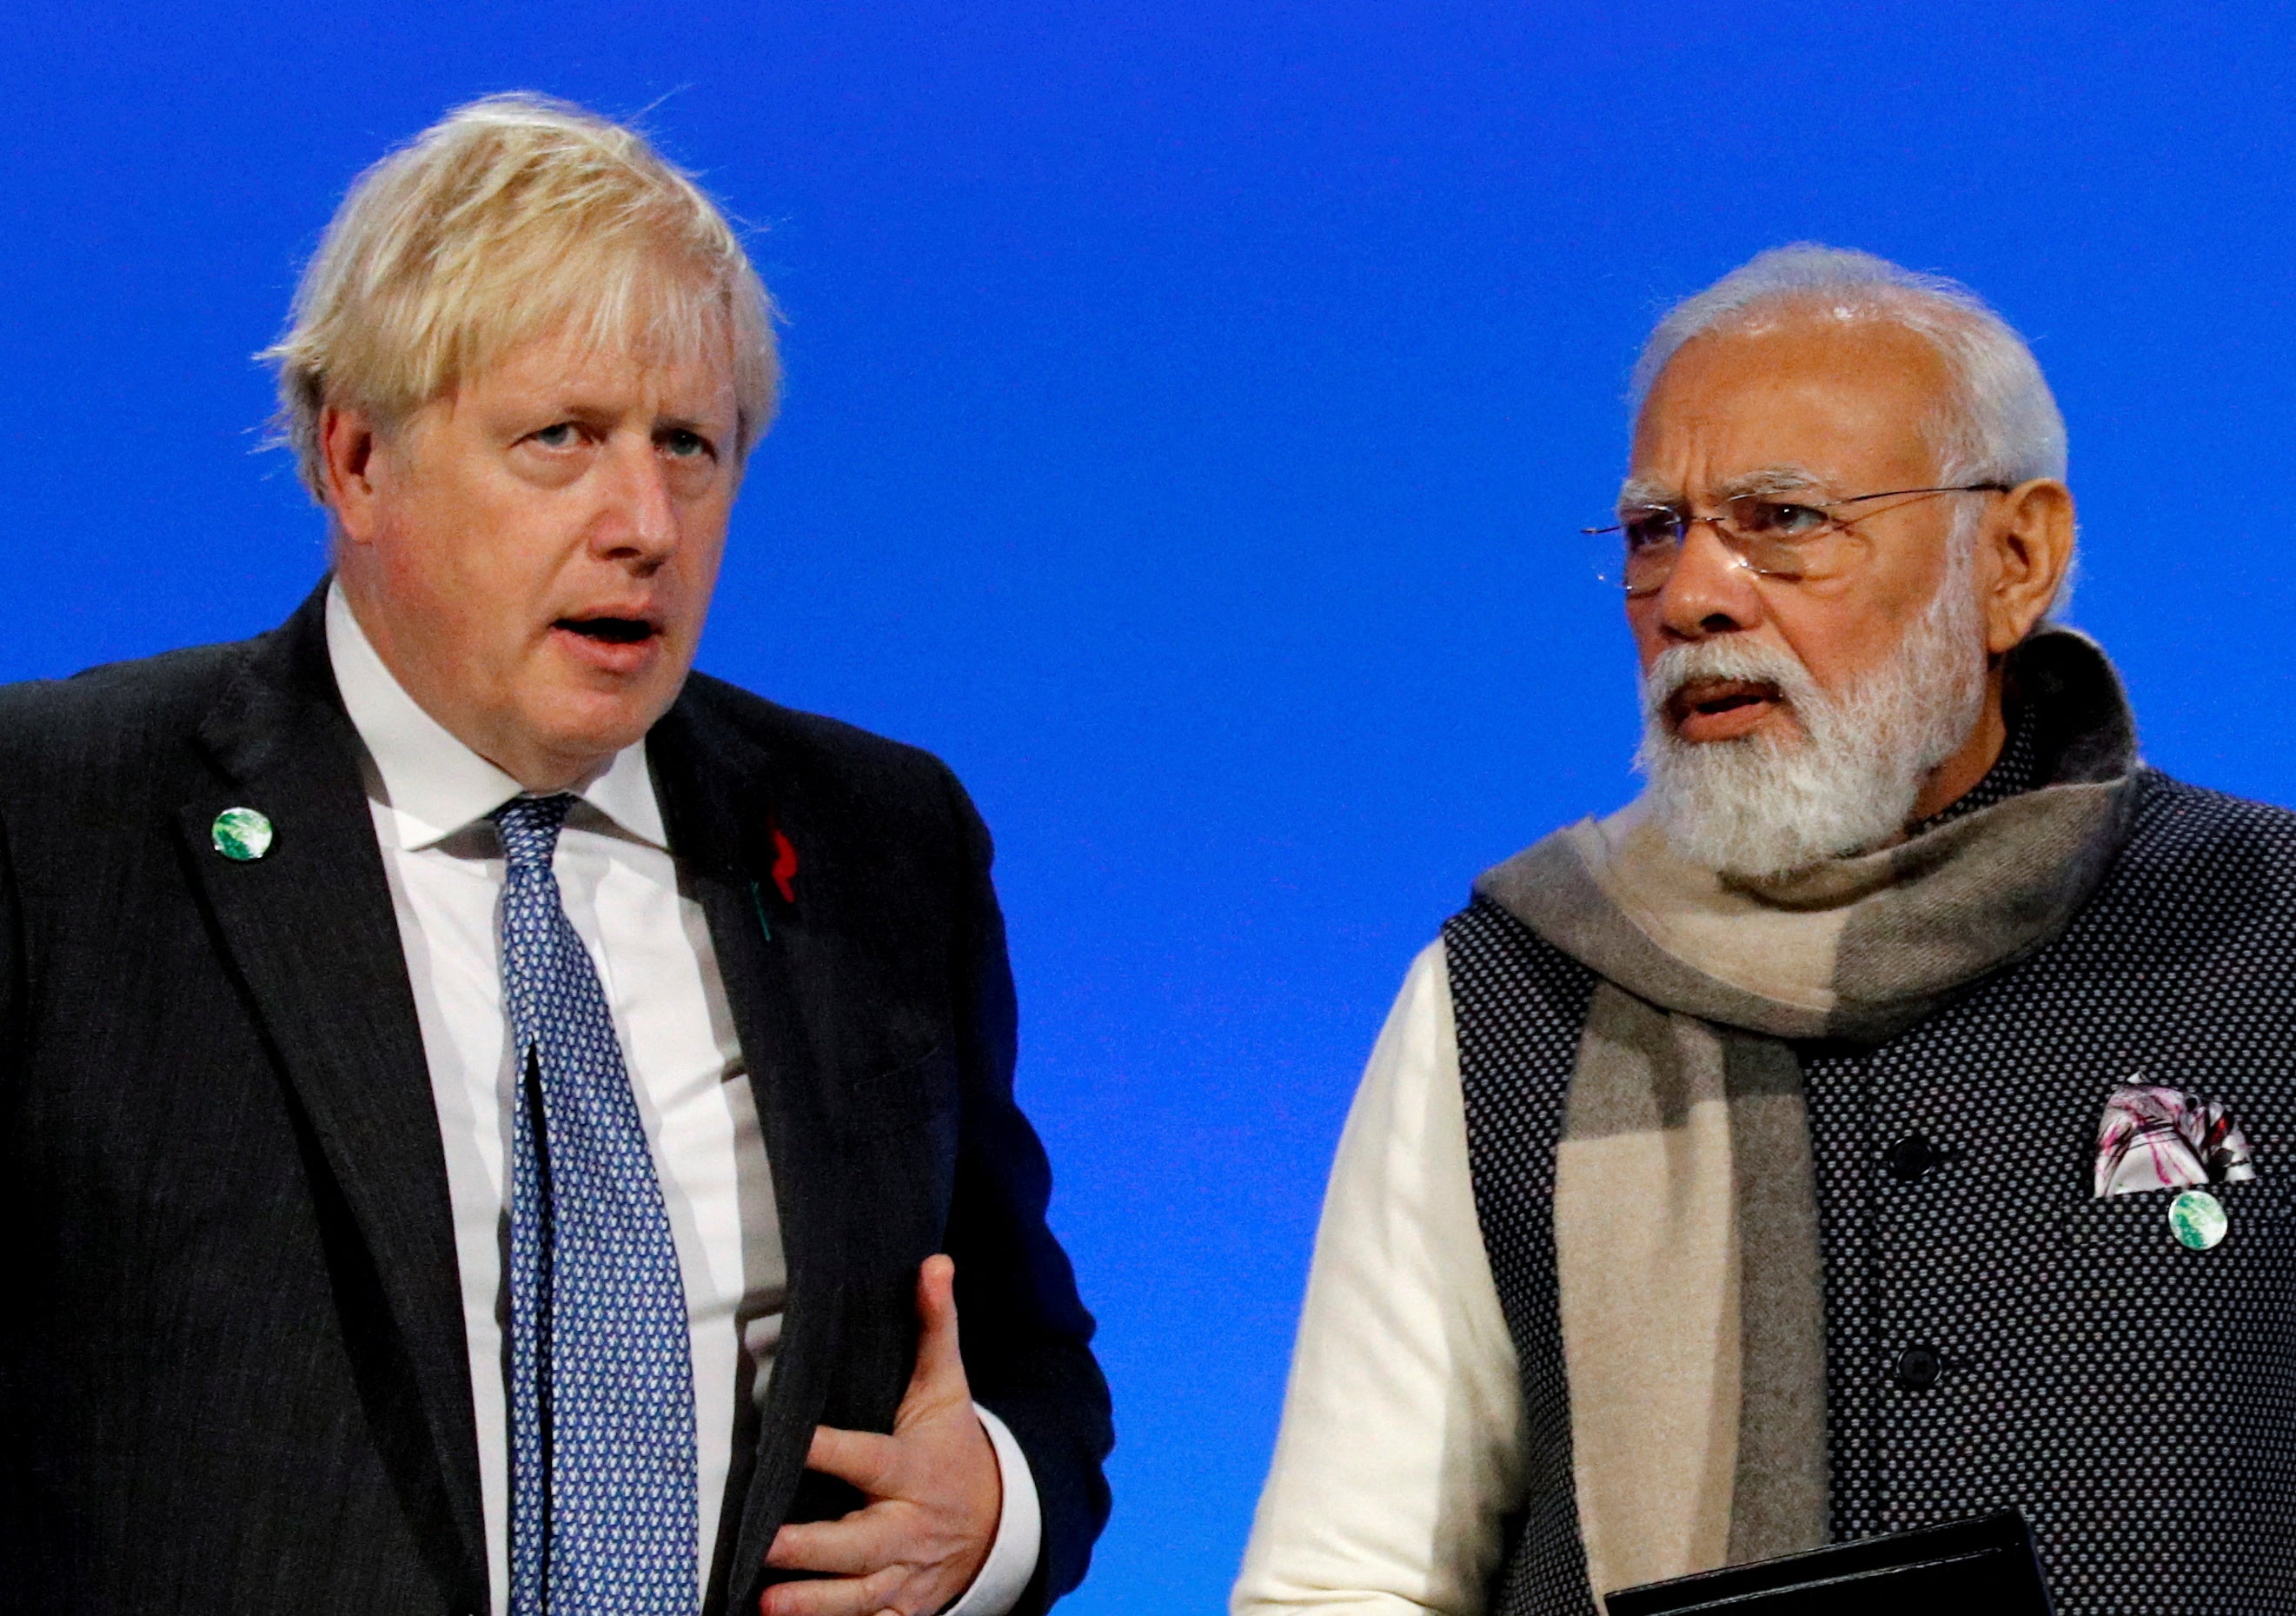 Before he became prime minister, Modi was banned from entering the UK and the US